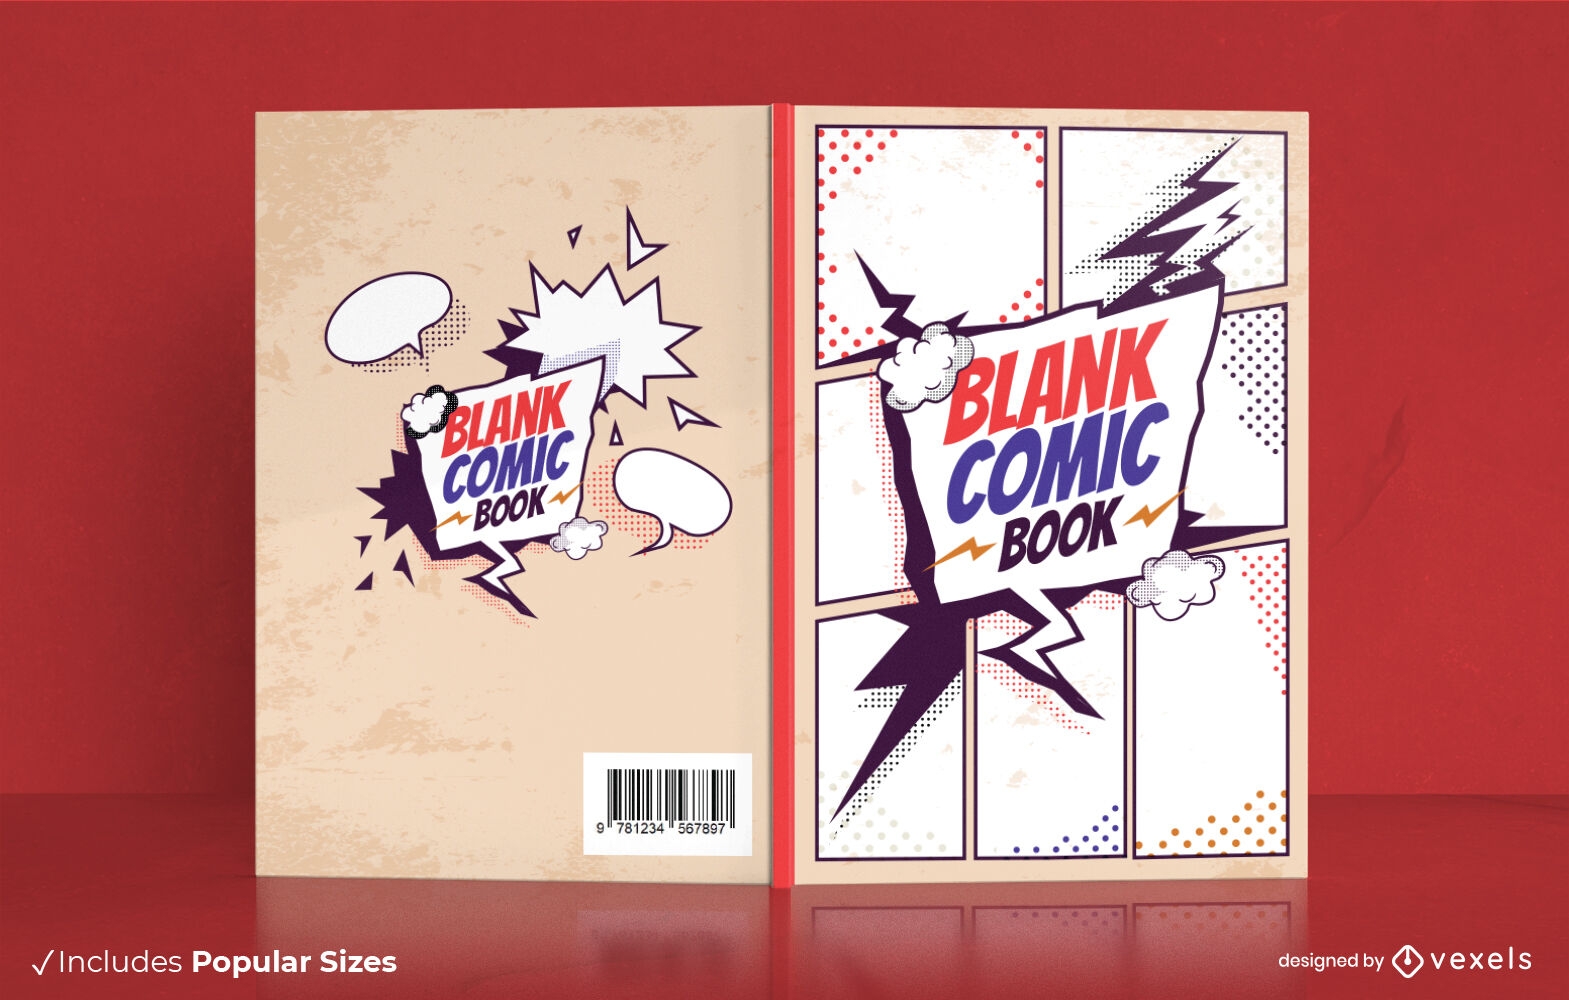 Classic blank action comic book cover design